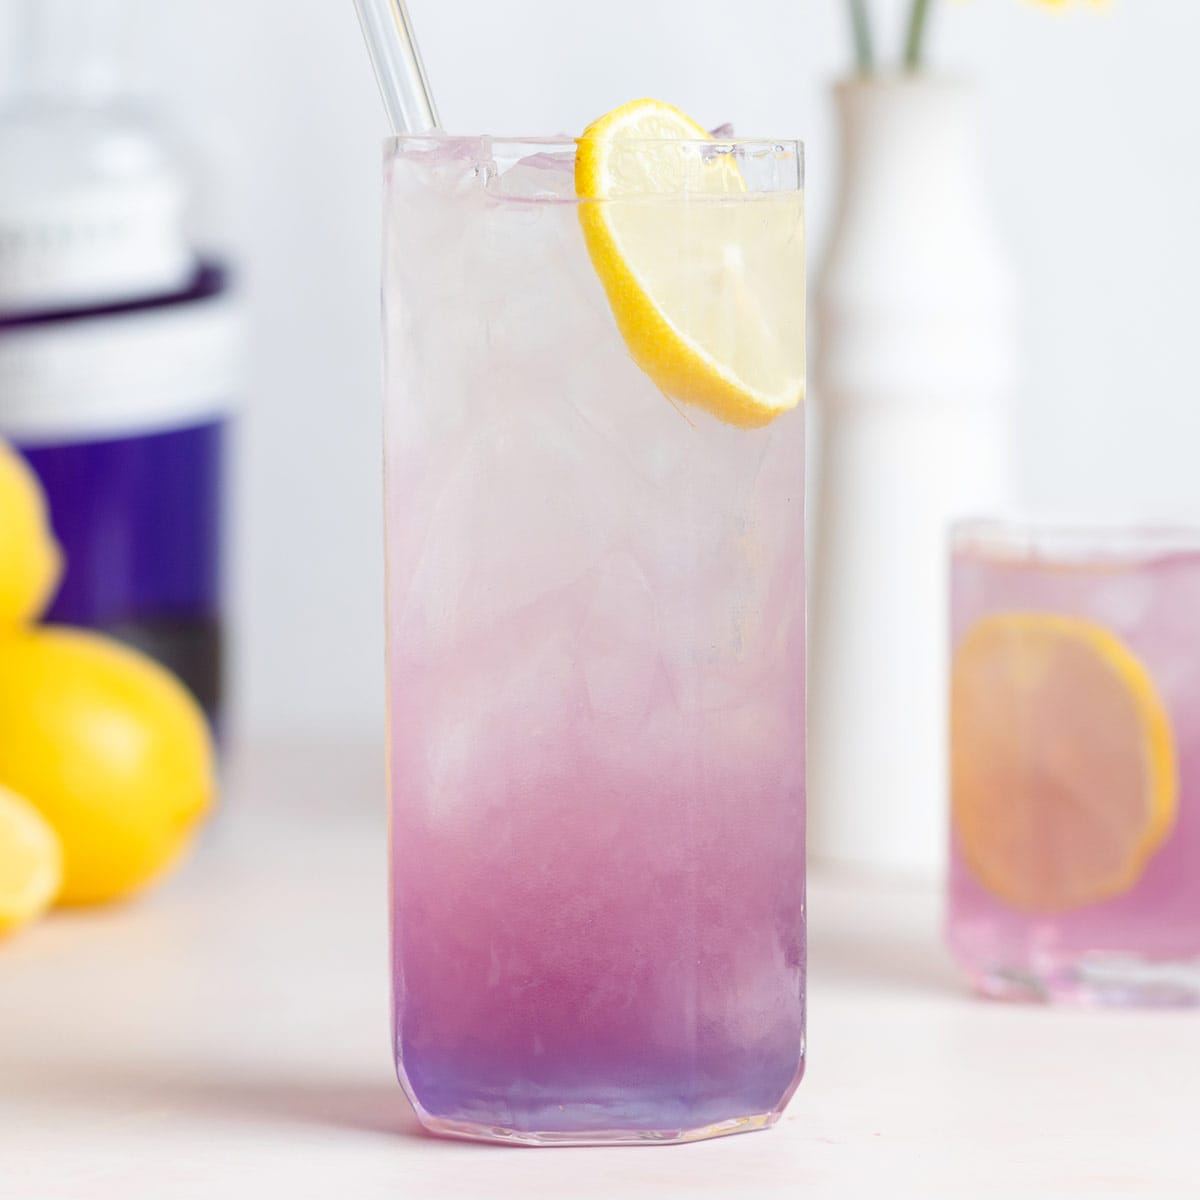 A light pink purple cocktail in a tall glass with an ombre effect garnished with a slice of lemon and a glass straw.